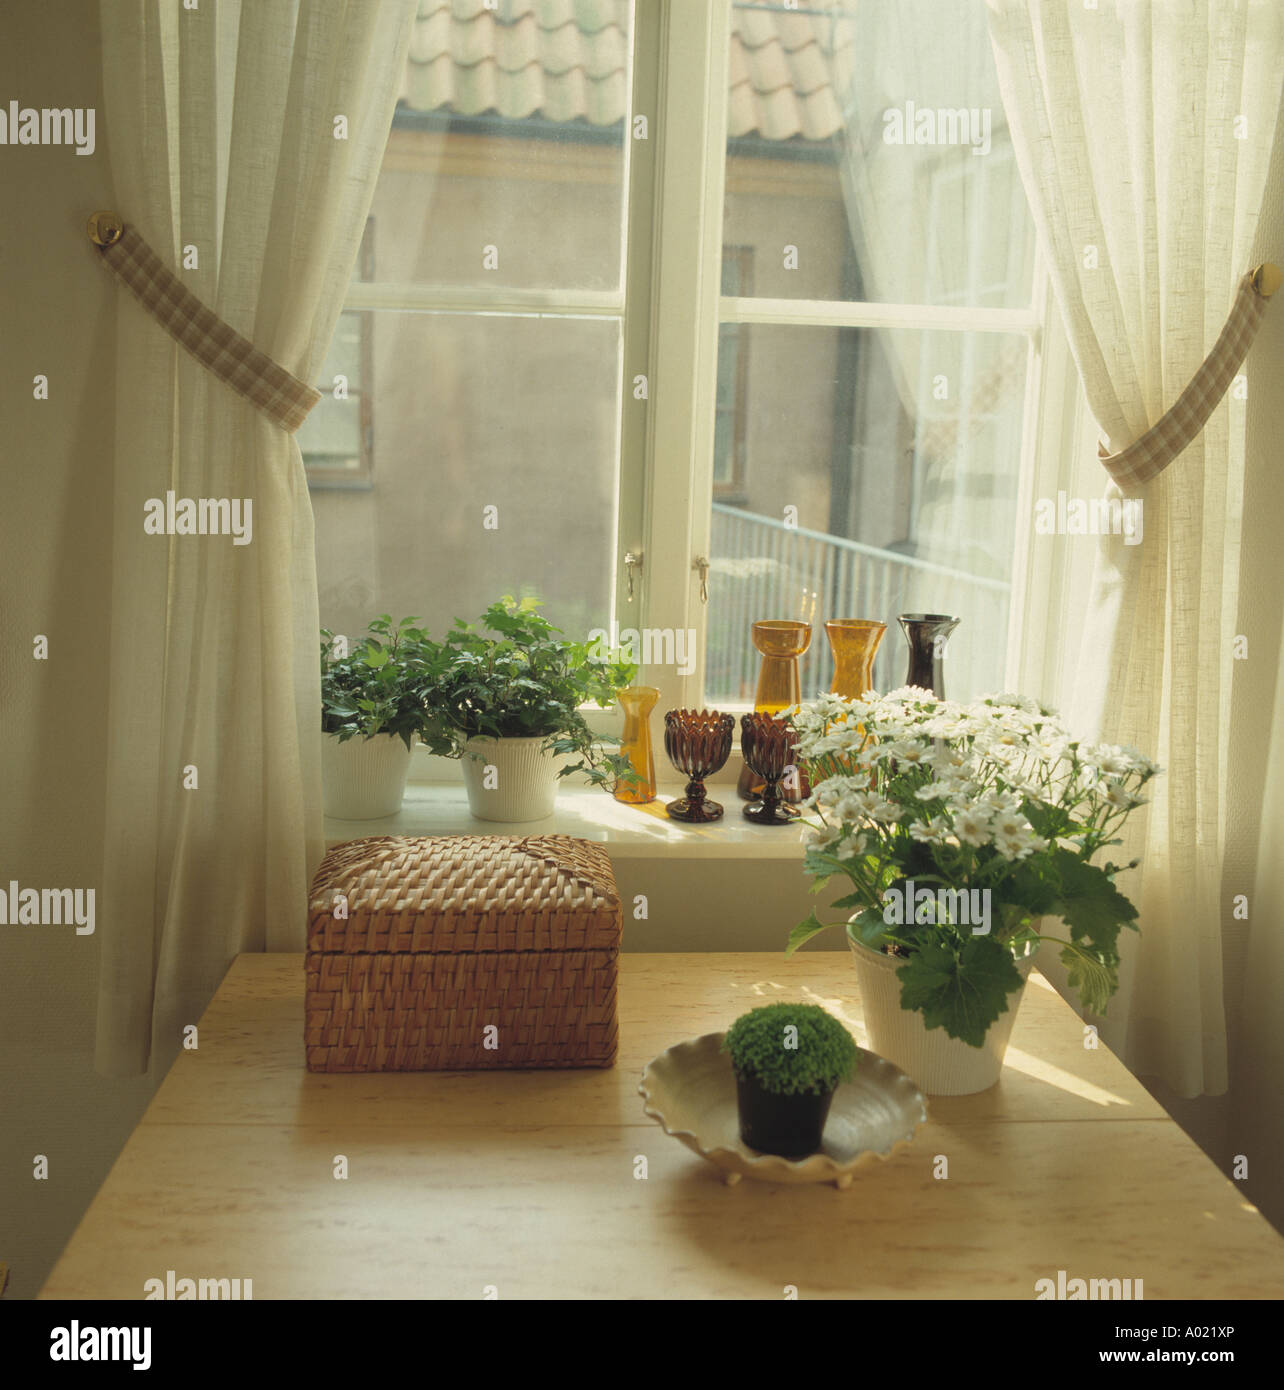 Small wooden box with green and flowering houseplants on table in front of  window with white curtains Stock Photo - Alamy